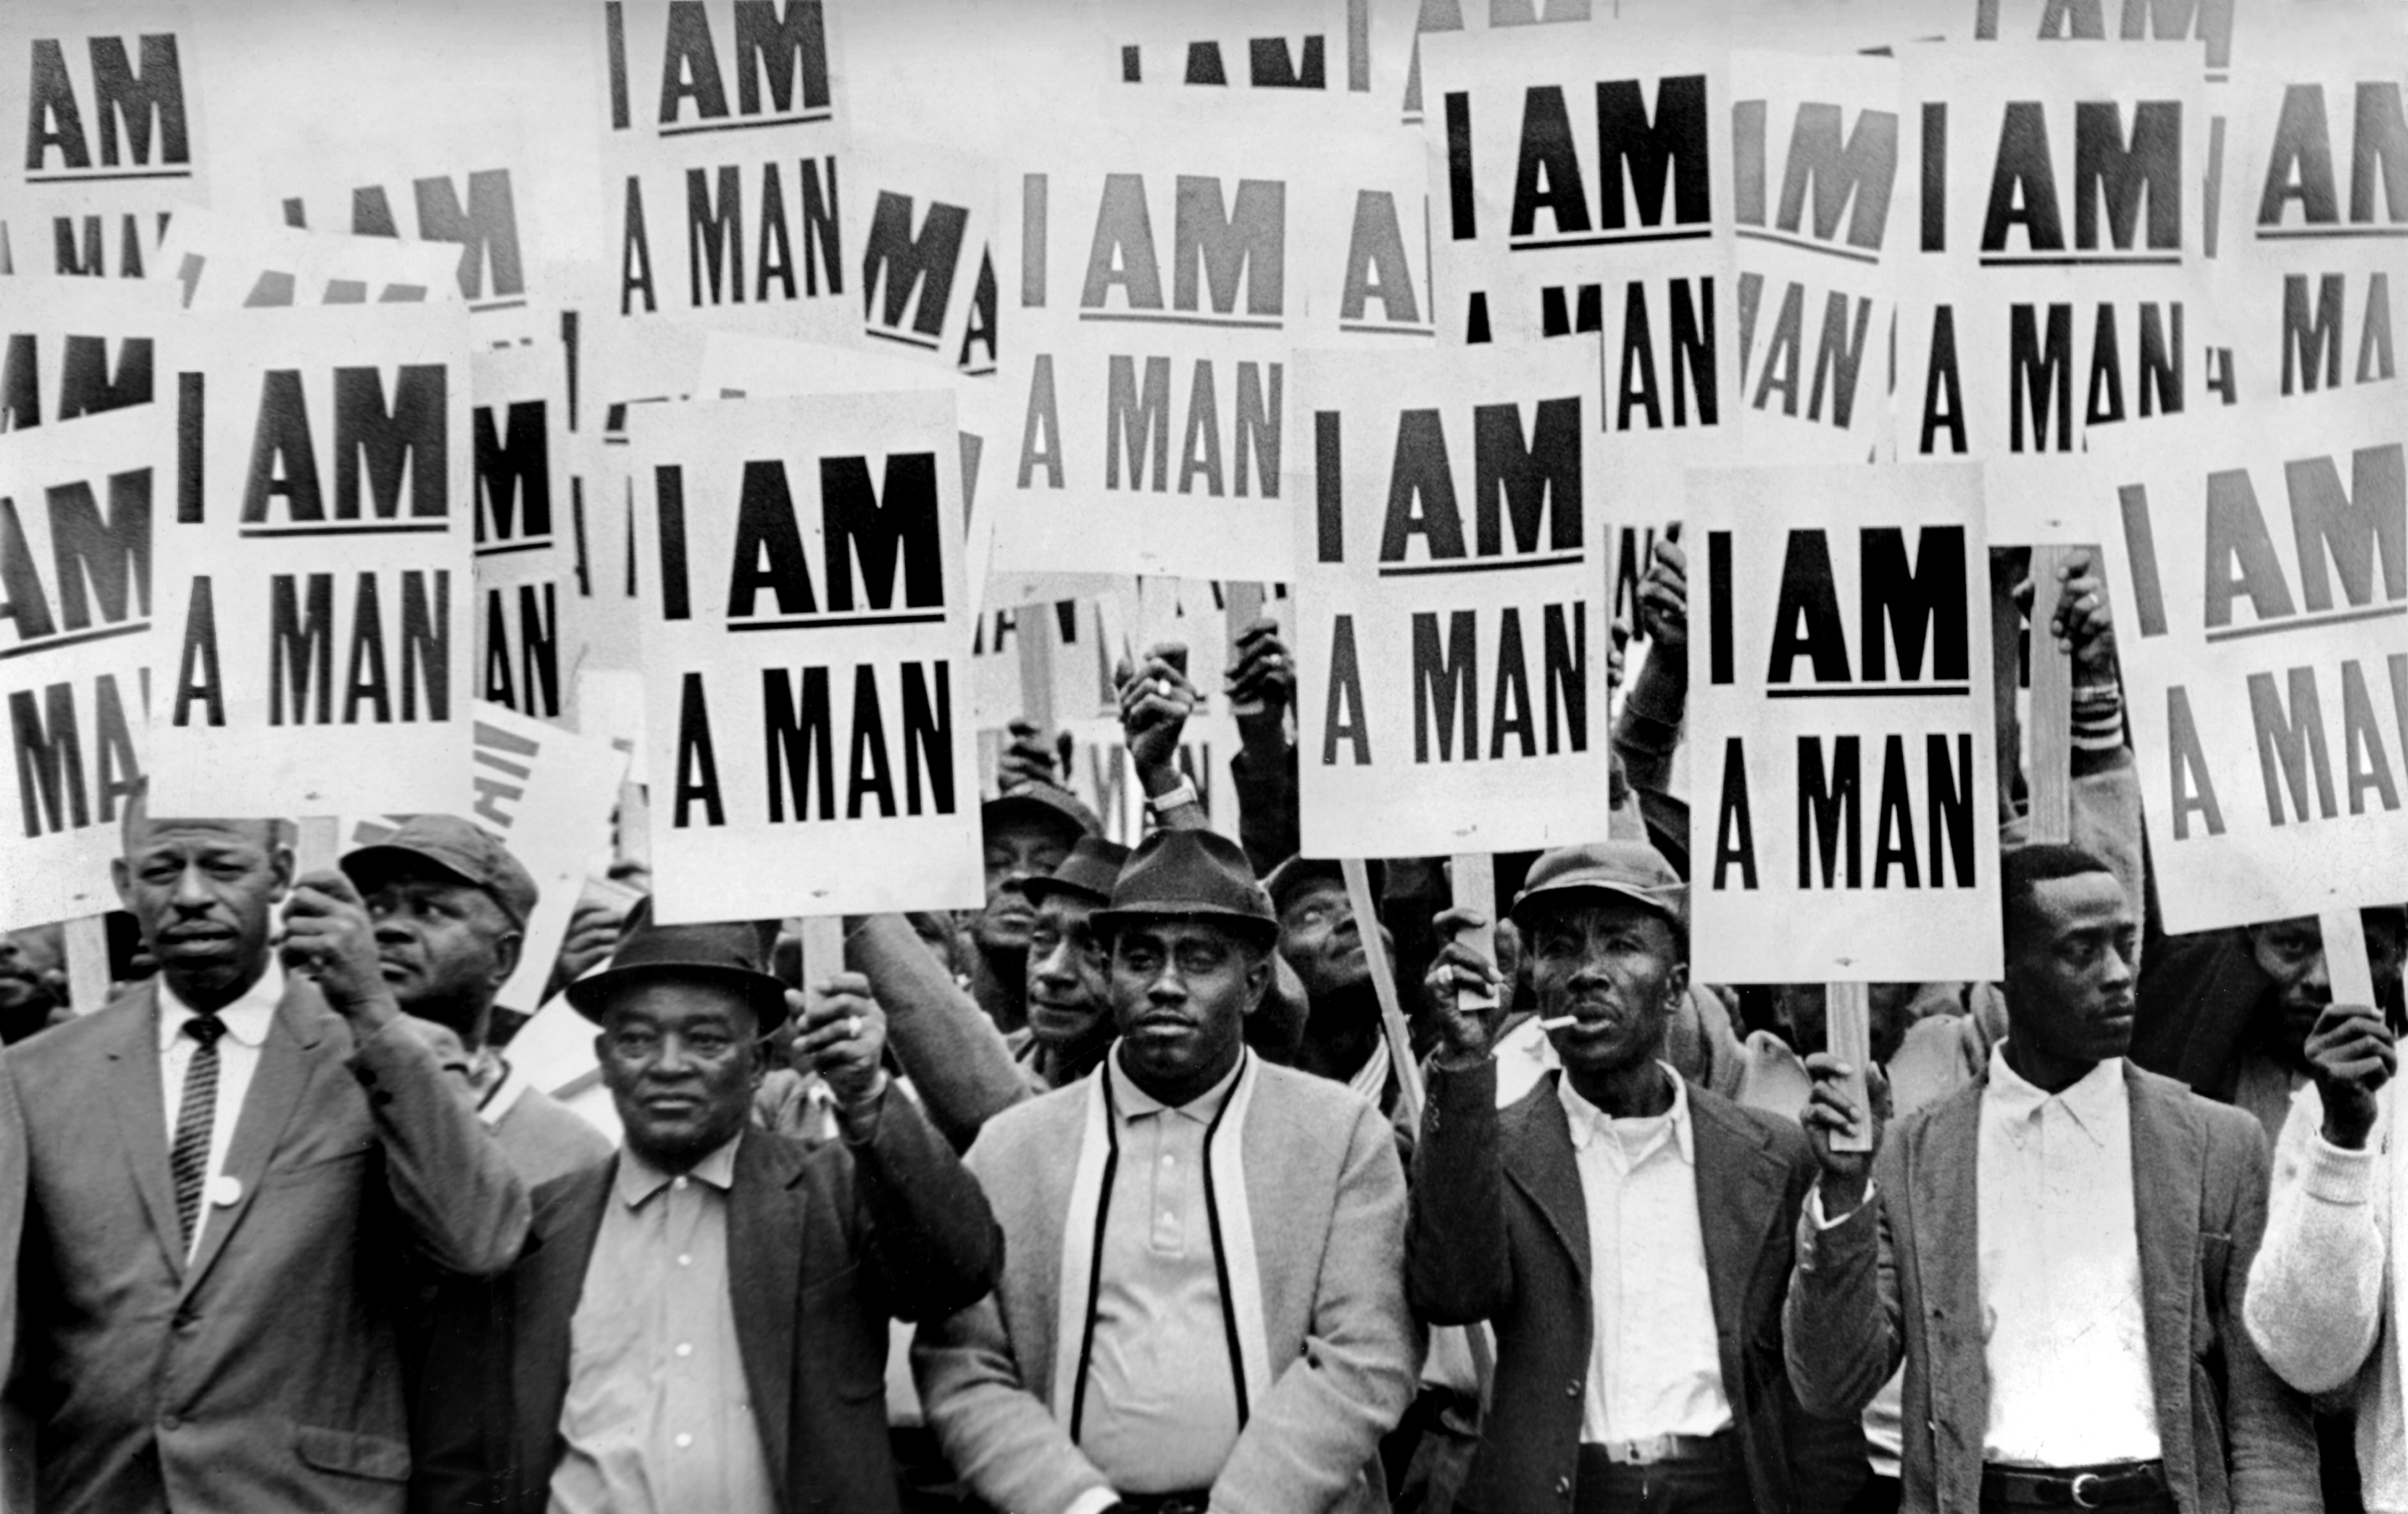 photo of William Lucy at a march where people held up "I am a man" signs